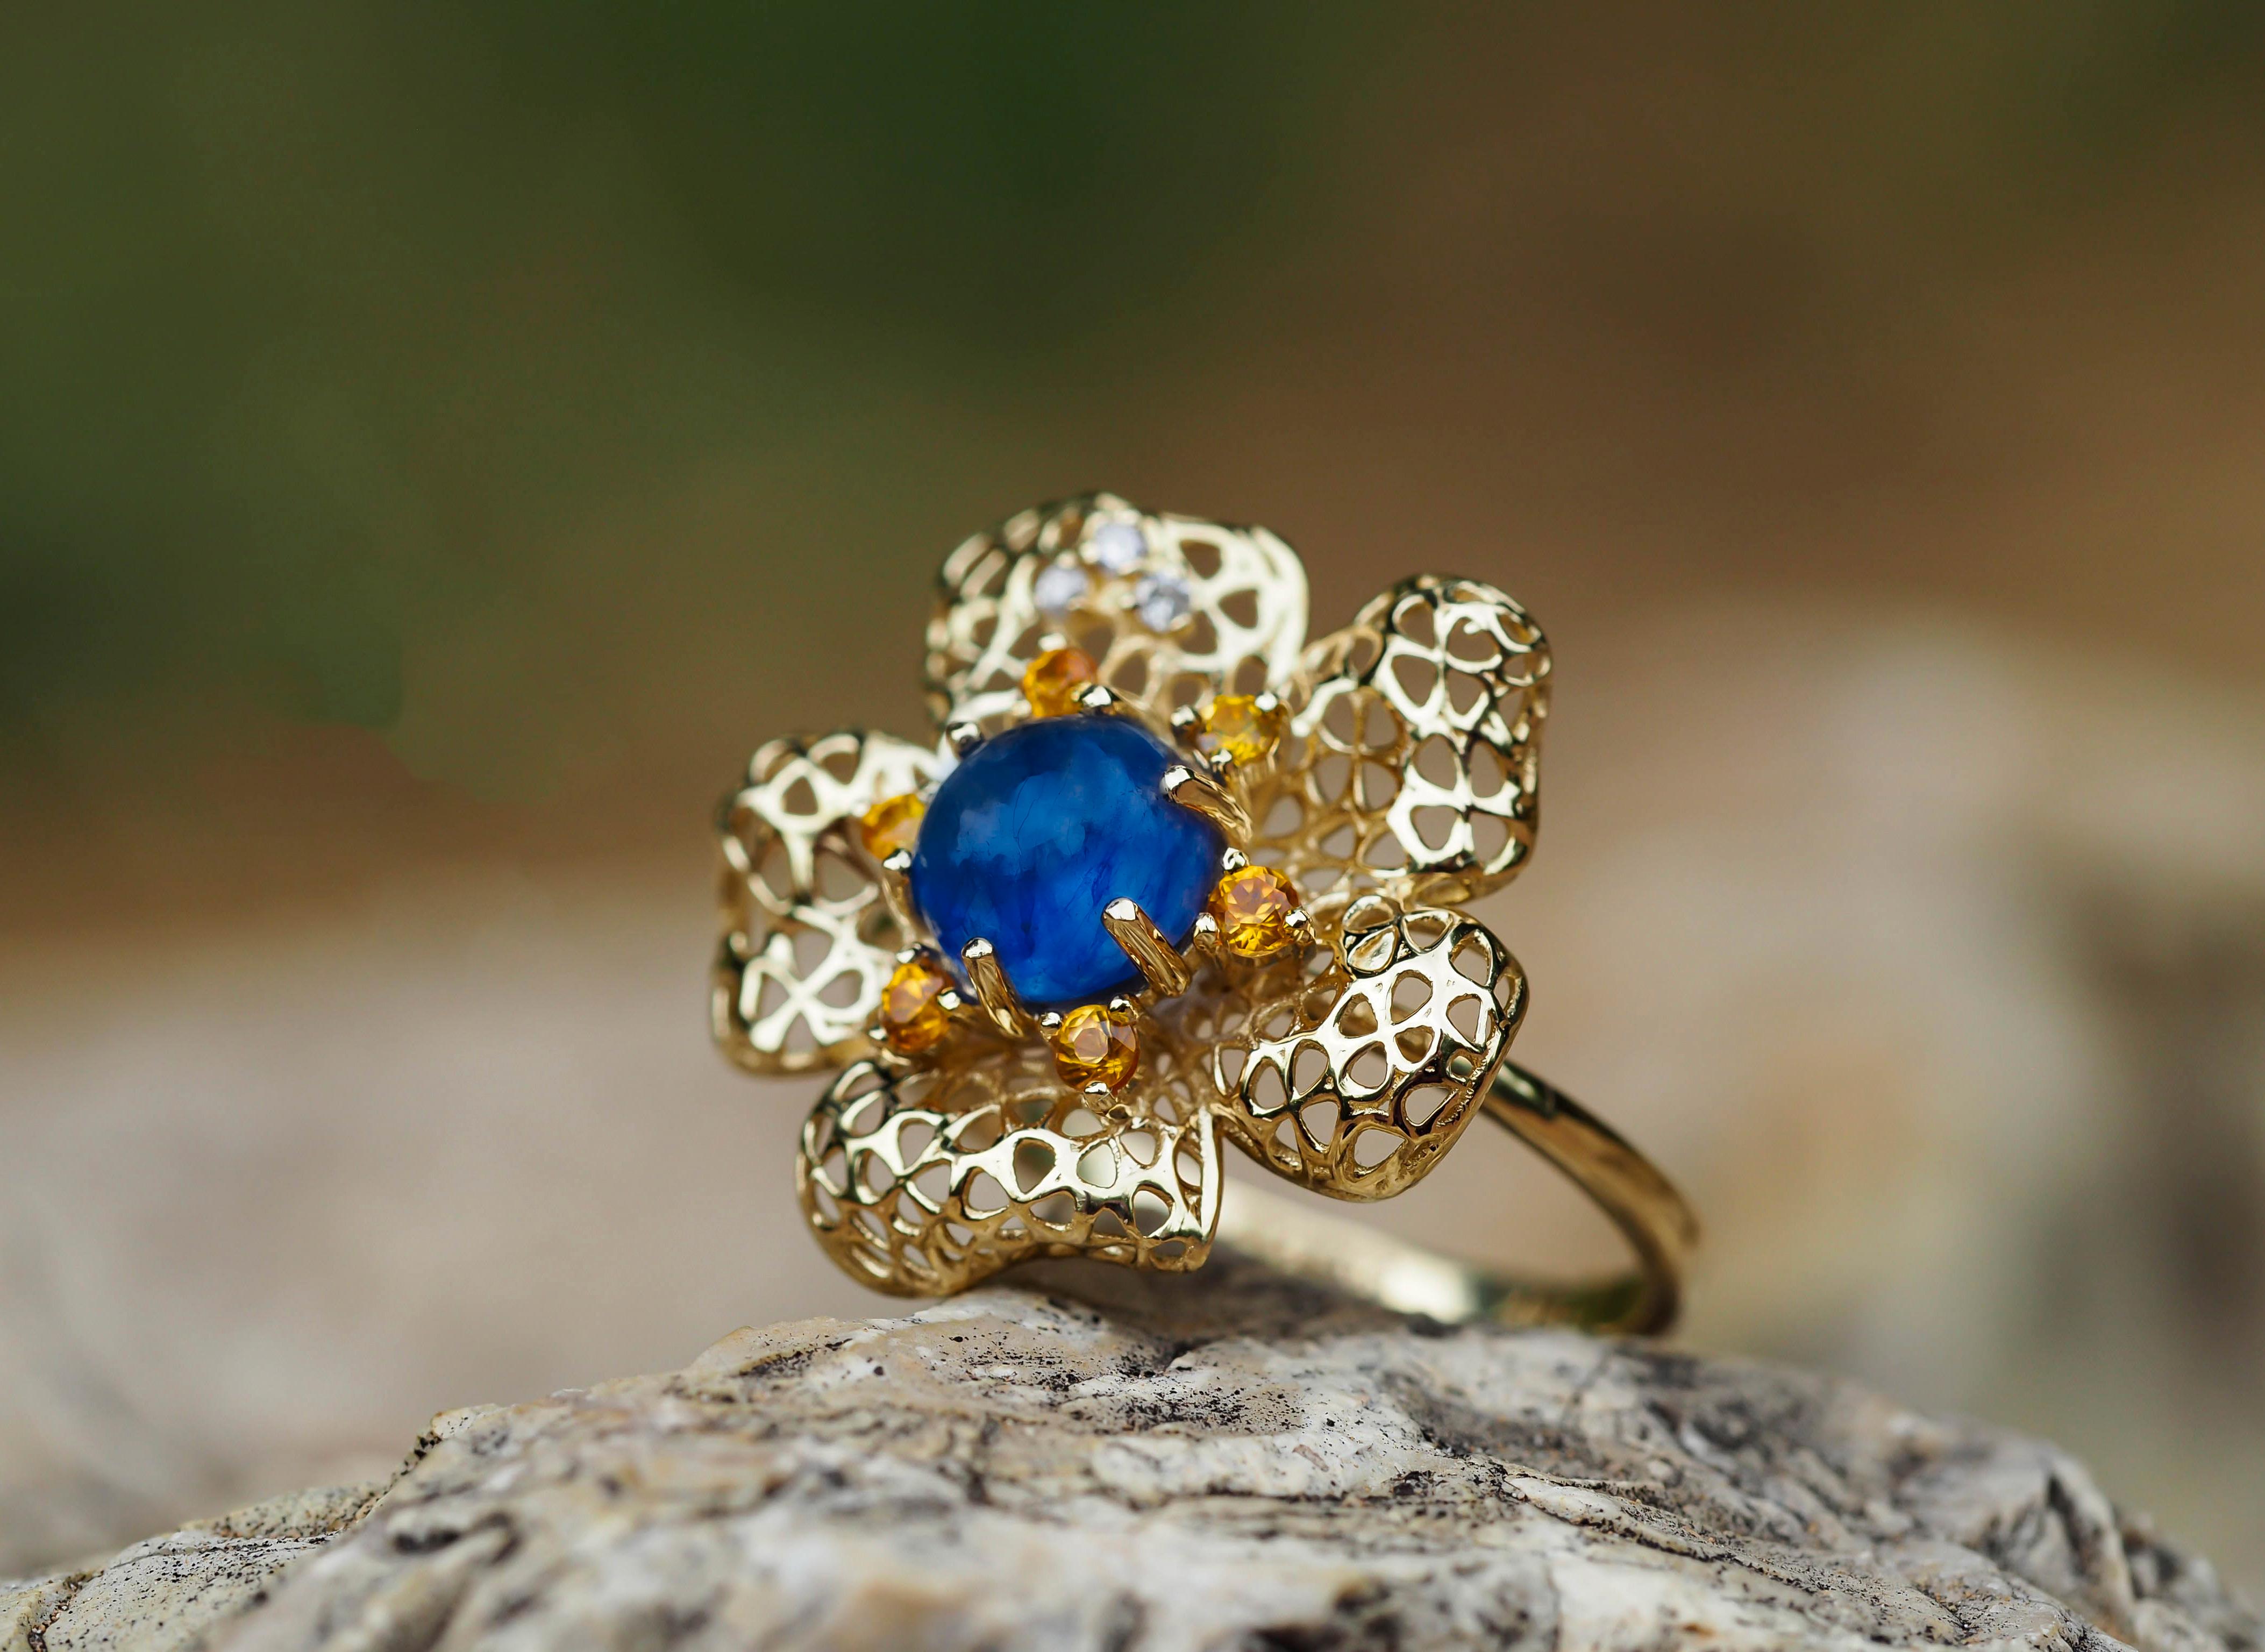 Flower ring with sapphire im 14k Gold. 
Cabochon Sapphire ring. September Birthstone ring. Blue sapphire ring. Gold flower ring.

Weight: 2.51 g. depends from size.
Metal: 14k gold.

Central stone: Sapphire
Cut: Round cabochon
Weight: approx 1.30